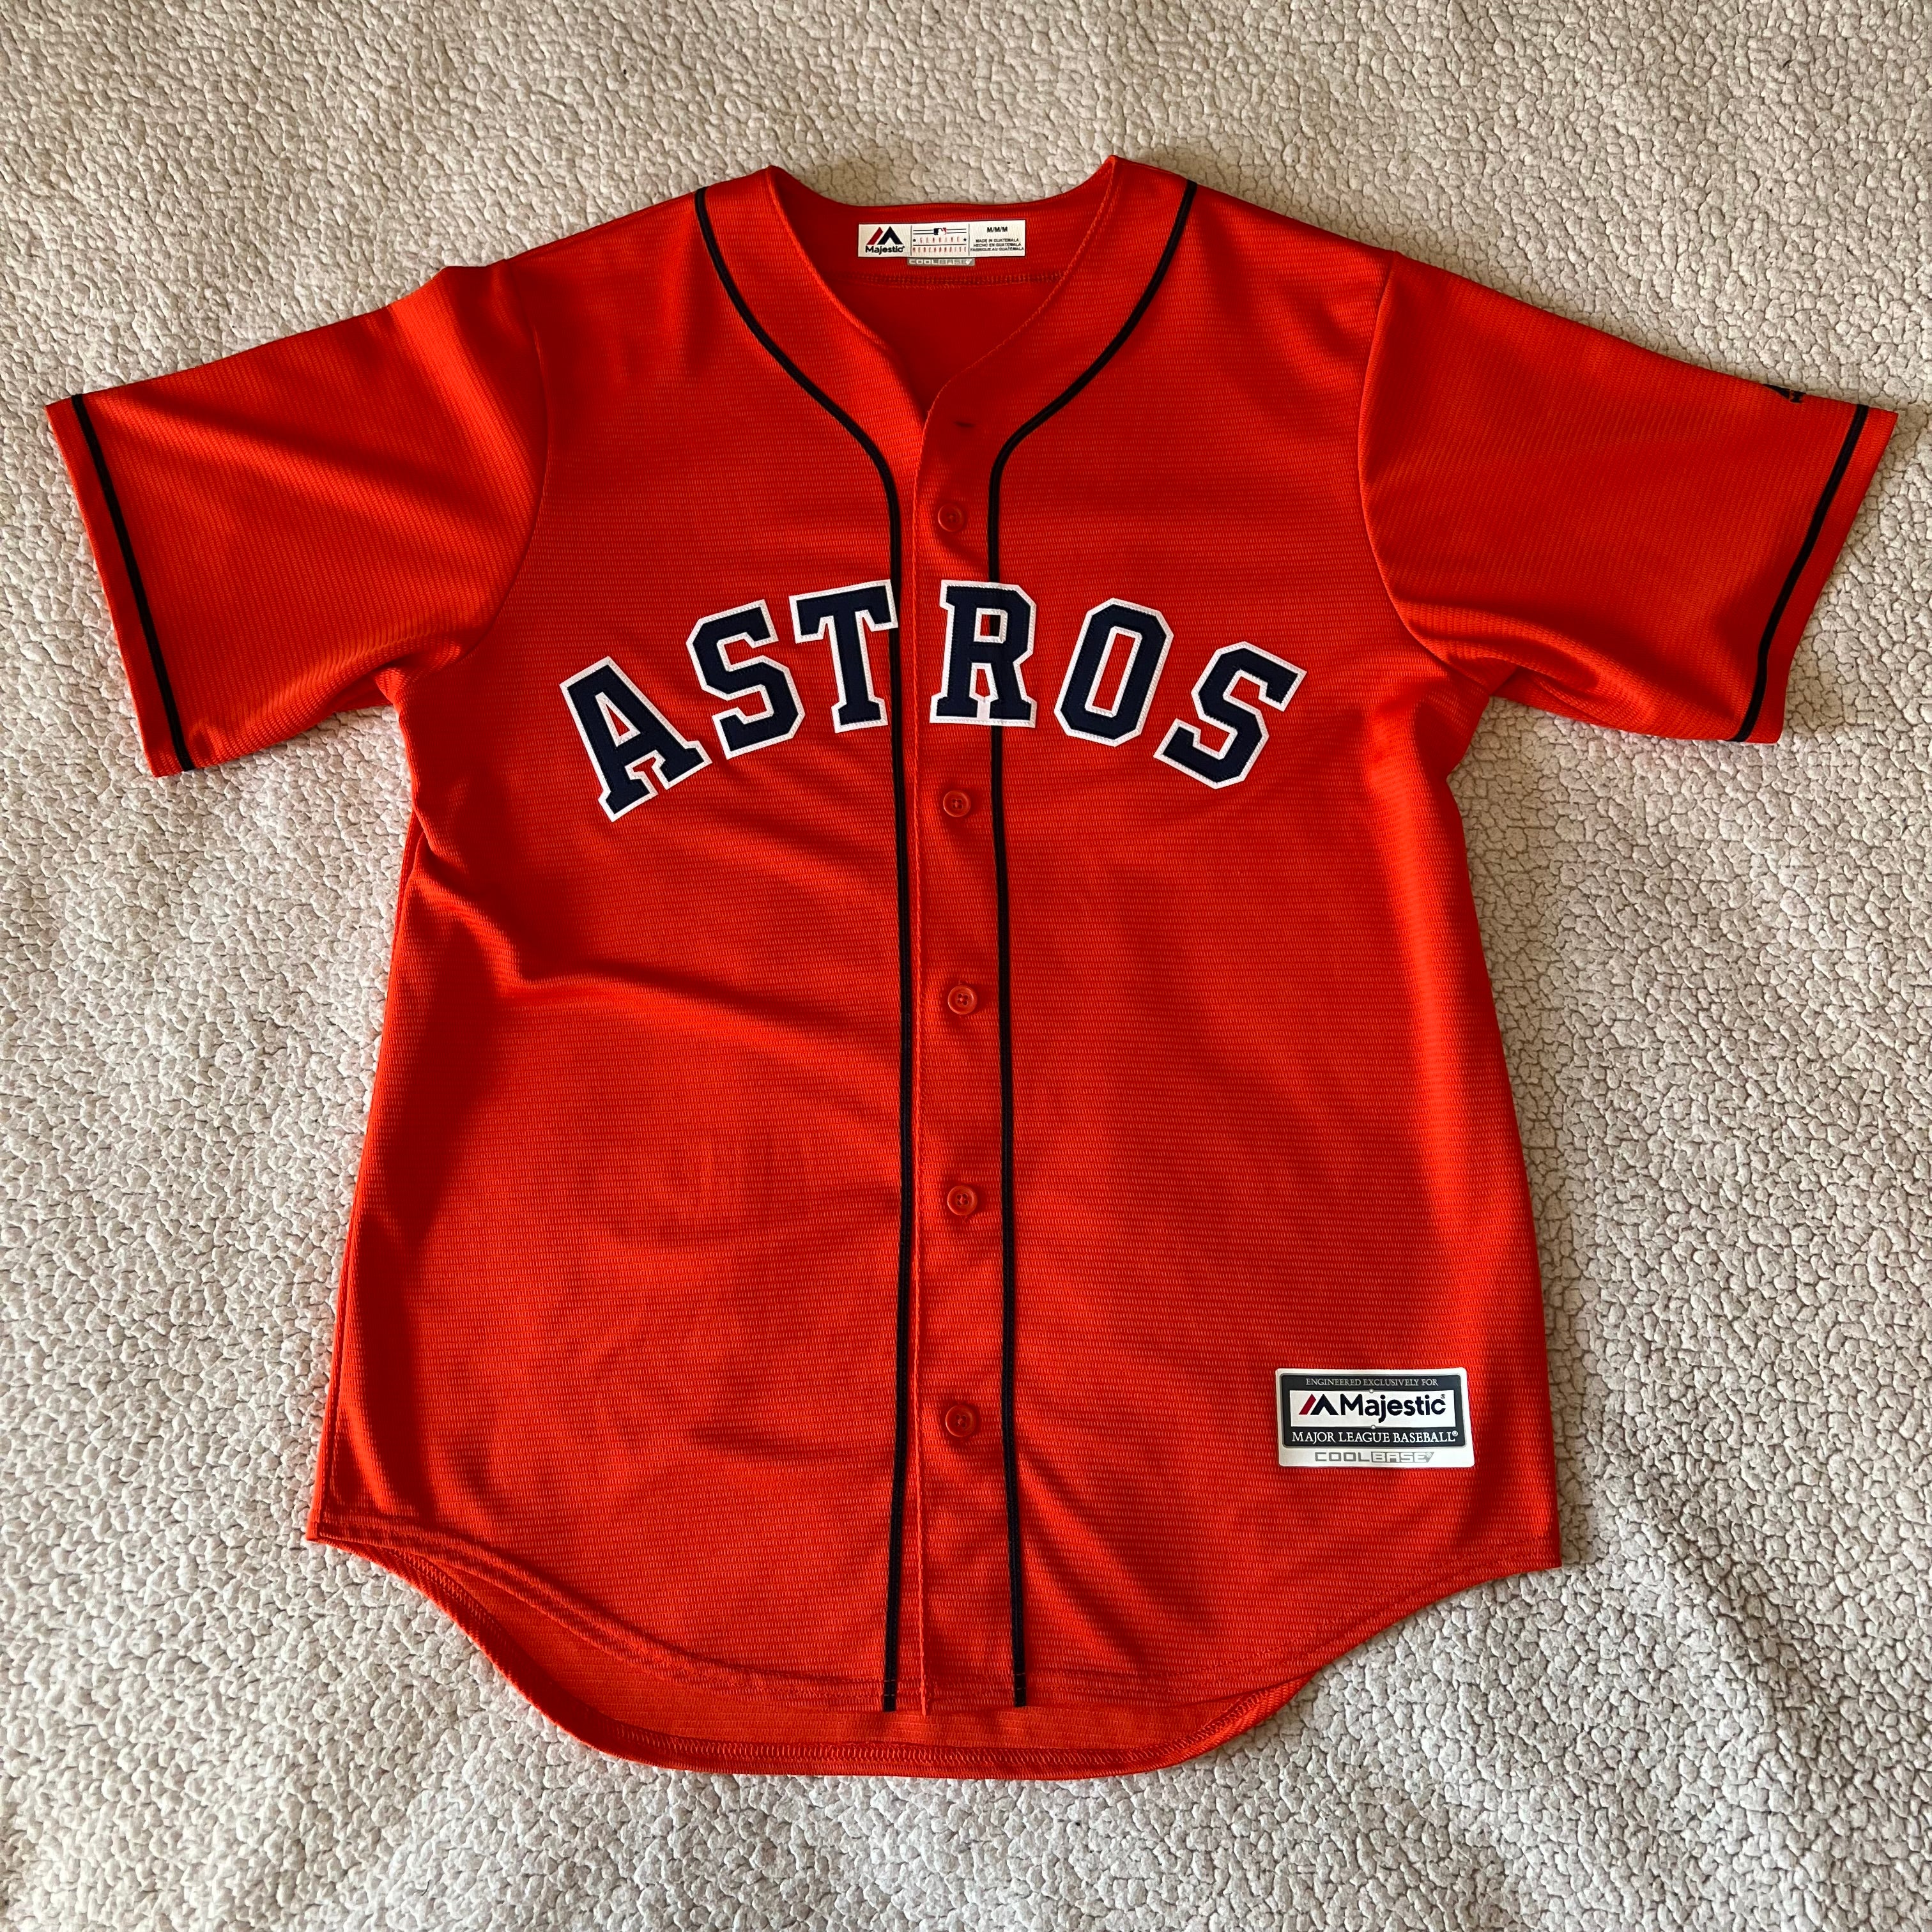 Jose Altuve Houston Astros Majestic Official Cool Base Player Jersey - White